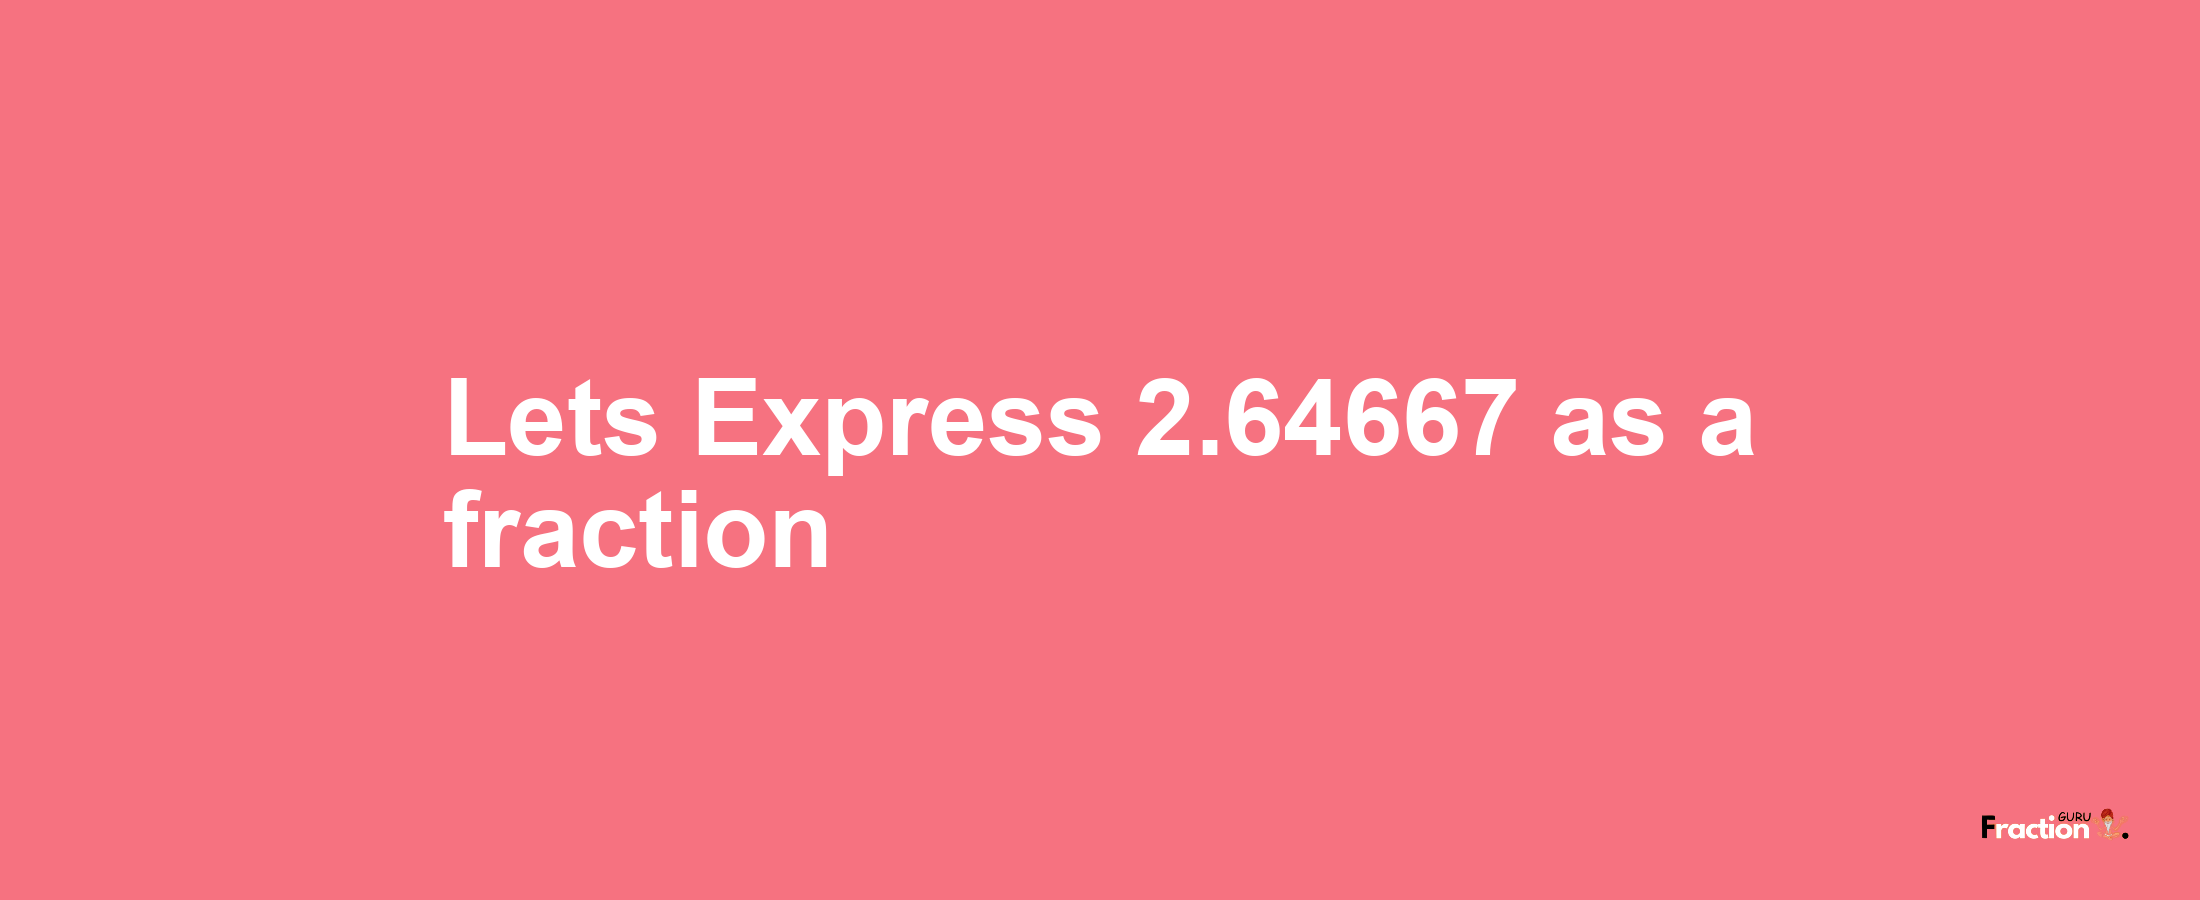 Lets Express 2.64667 as afraction